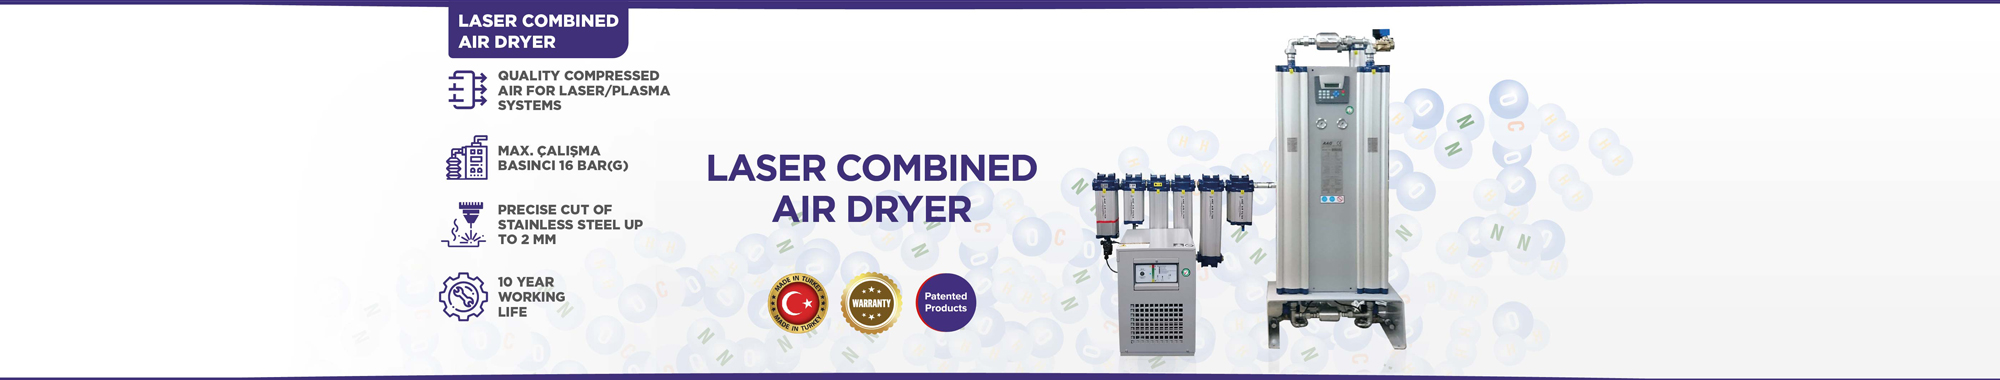 Laser Combined Air Dryer